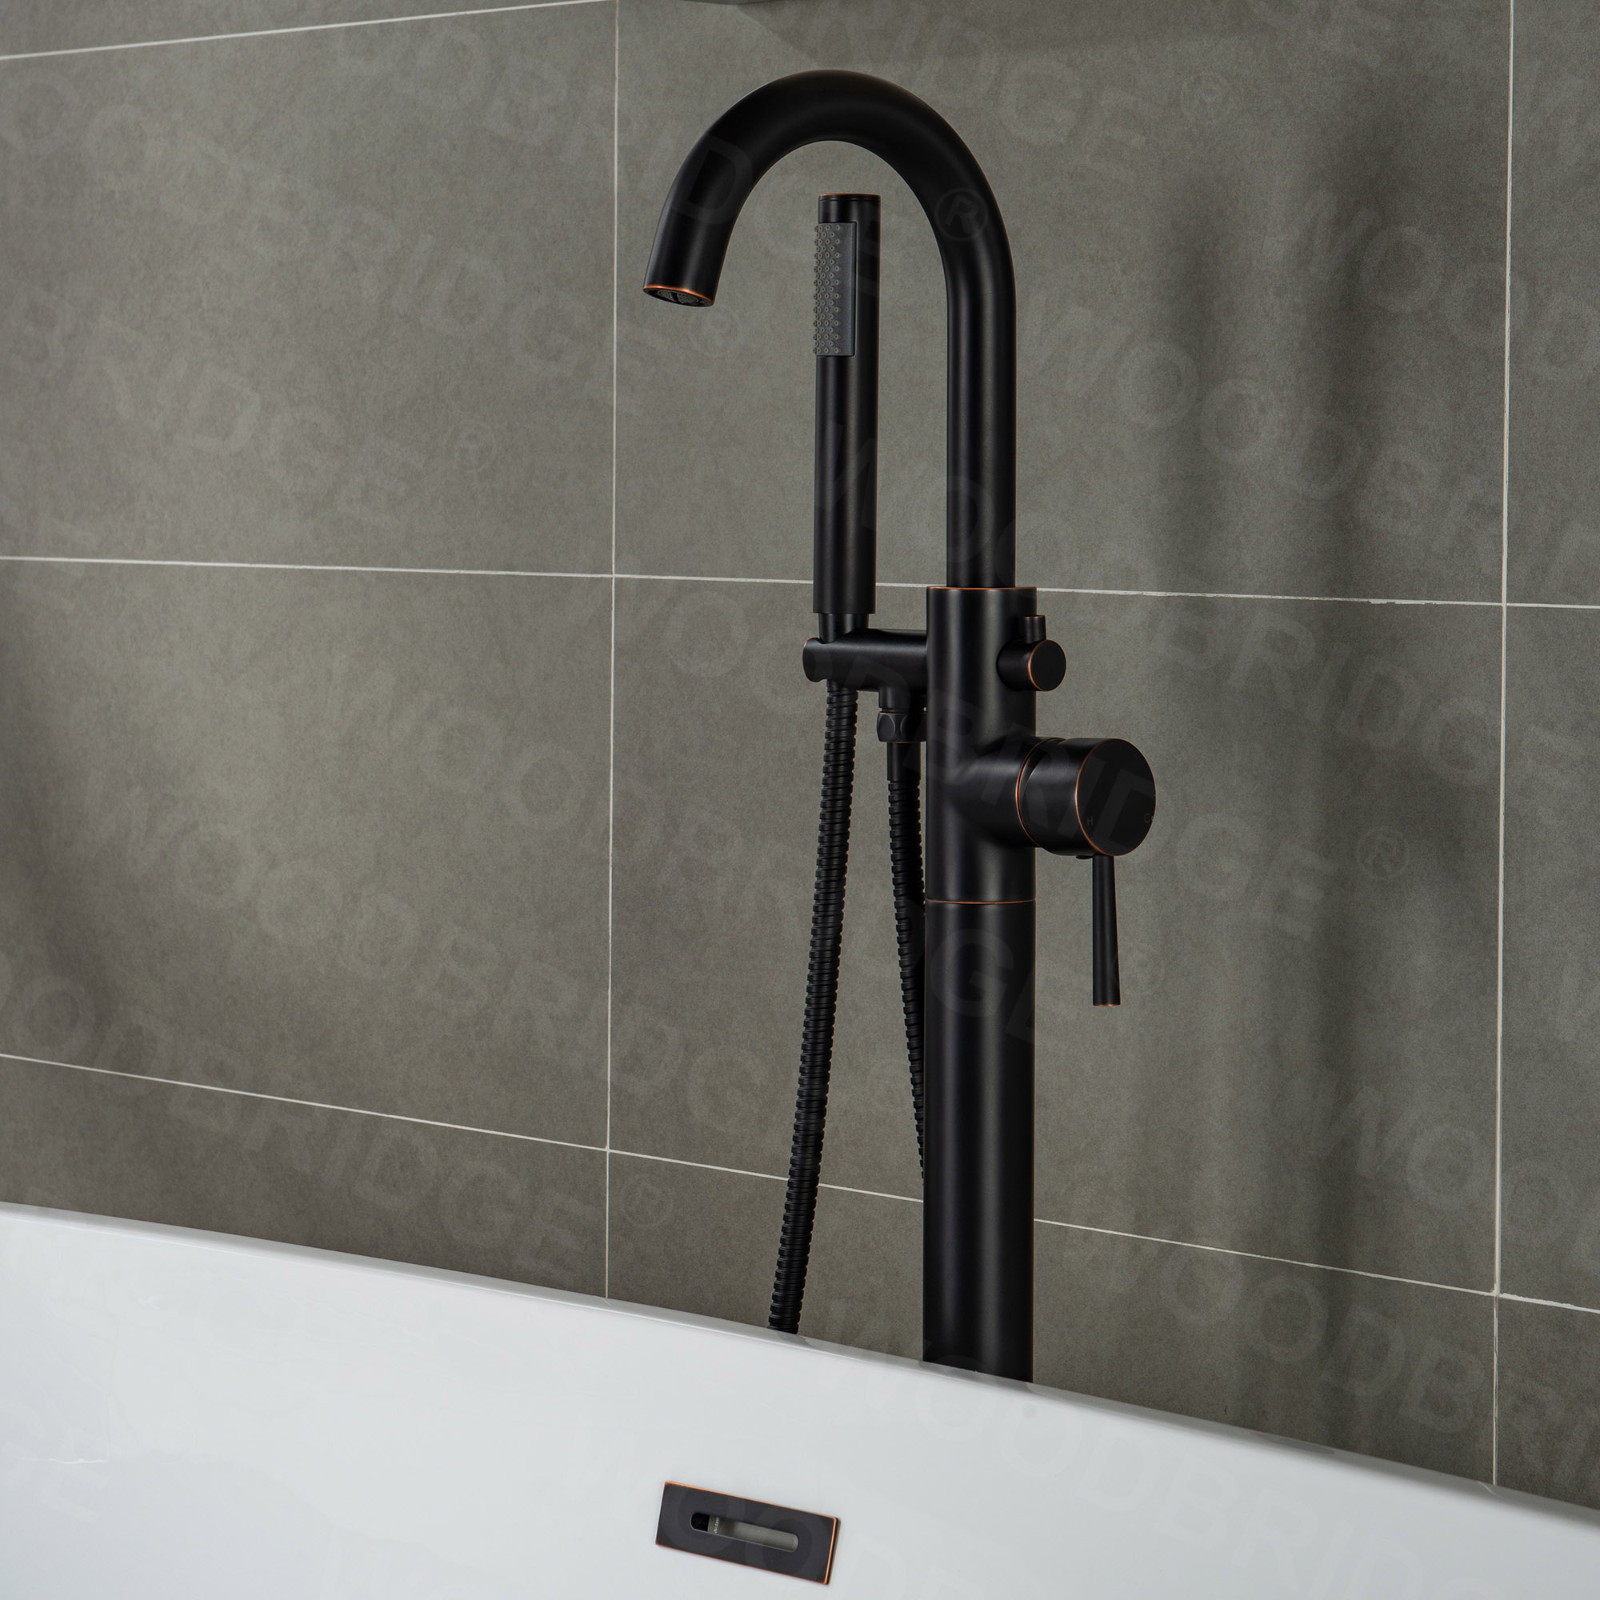  WOODBRIDGE F0010ORBRD Contemporary Single Handle Floor Mount Freestanding Tub Filler Faucet with Hand shower in Oil Rubbed Bronze Finish._9706